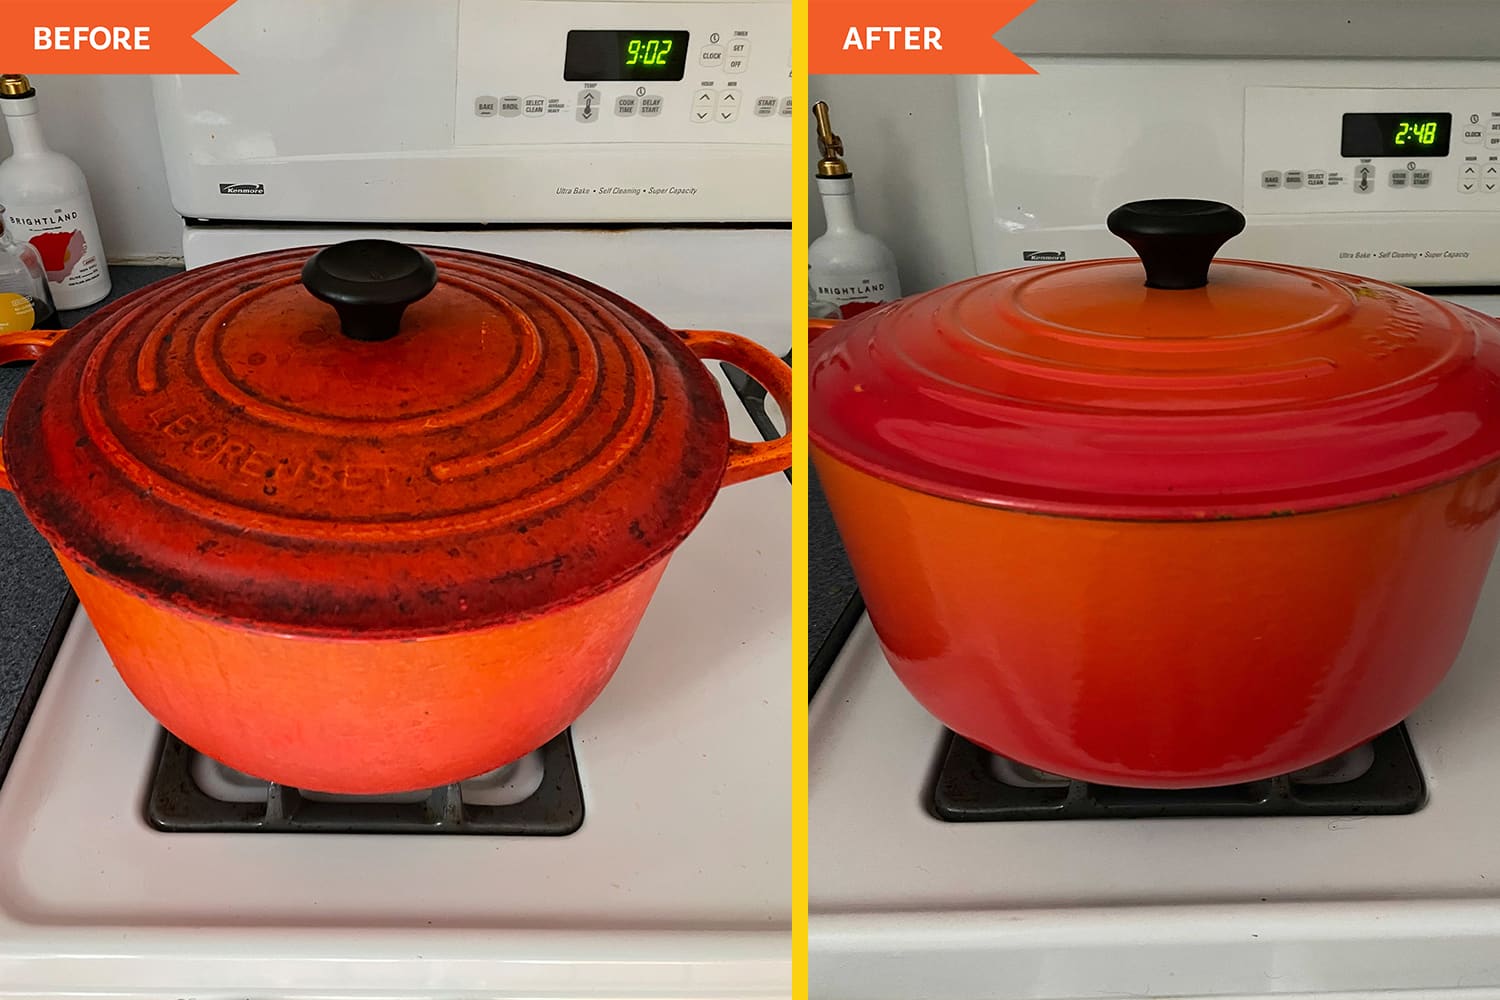 https://cdn.apartmenttherapy.info/image/upload/v1635523452/11-2021-DutchOvenCleaning/Dutch-oven-before-after-diptych.jpg